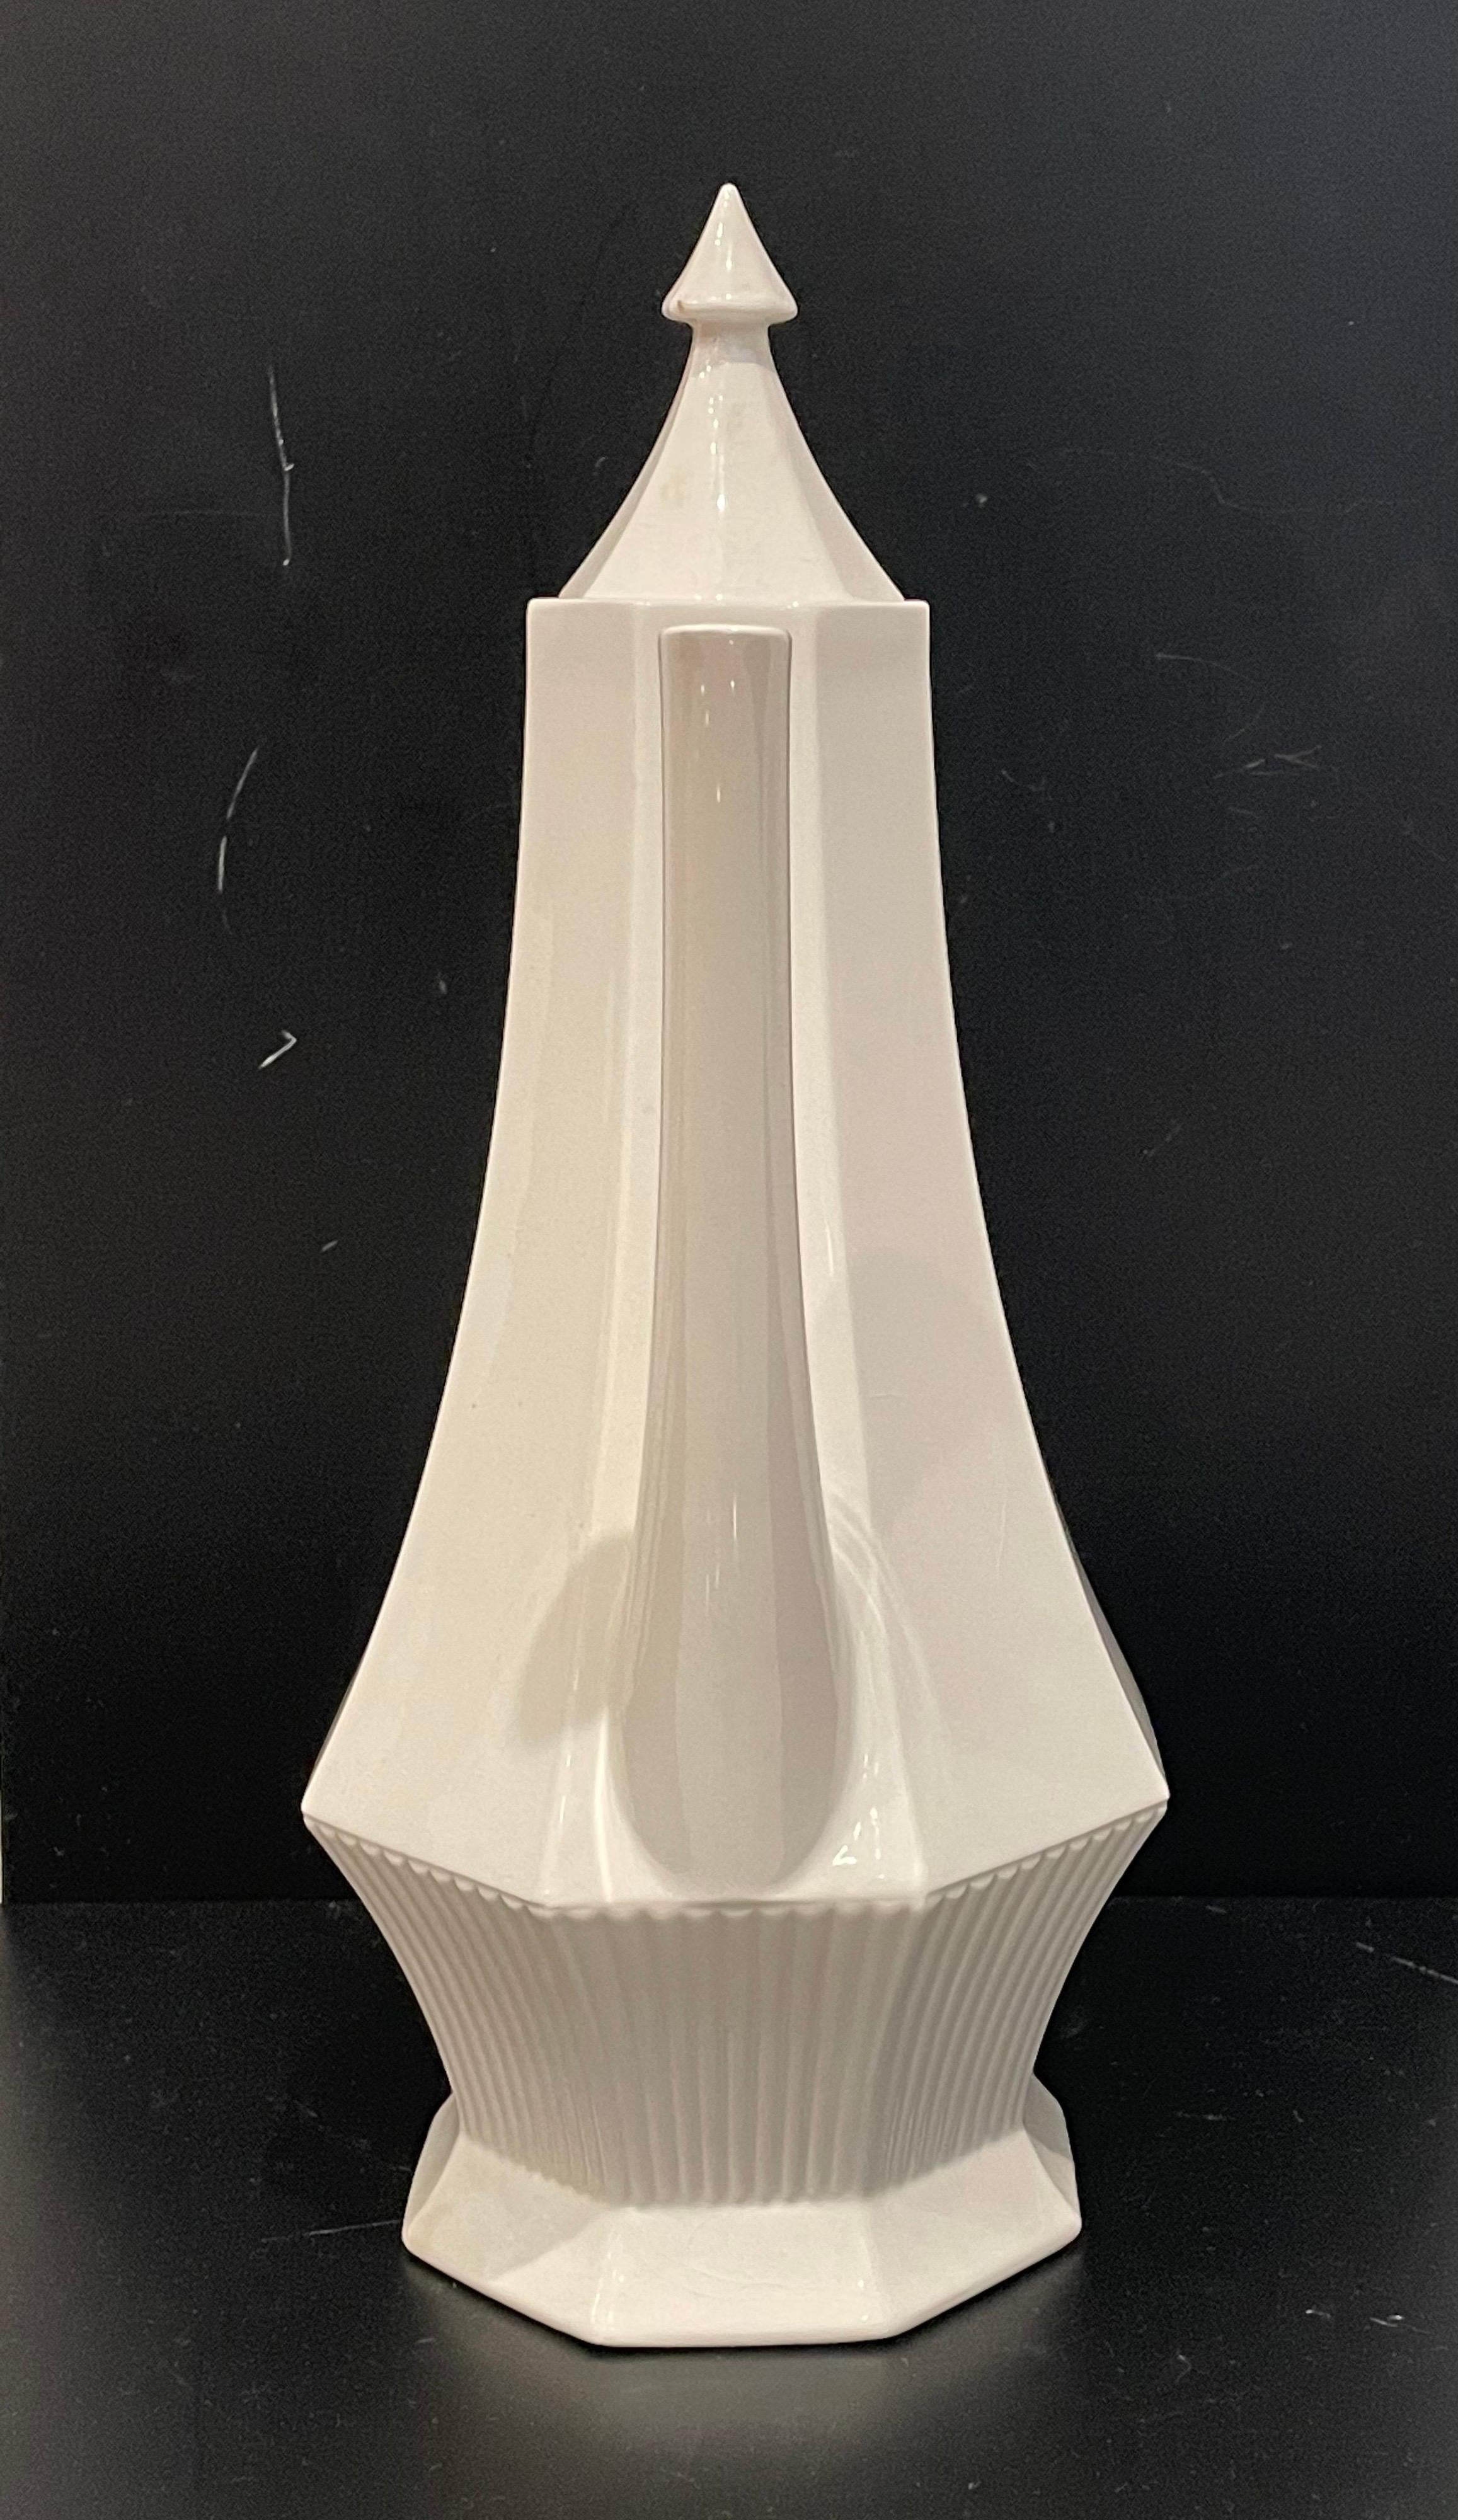 Beautiful tall elegant great design tall white porcelain coffee pot by Independence ironstone, excellent condition Made in Japan, circa 1950s.